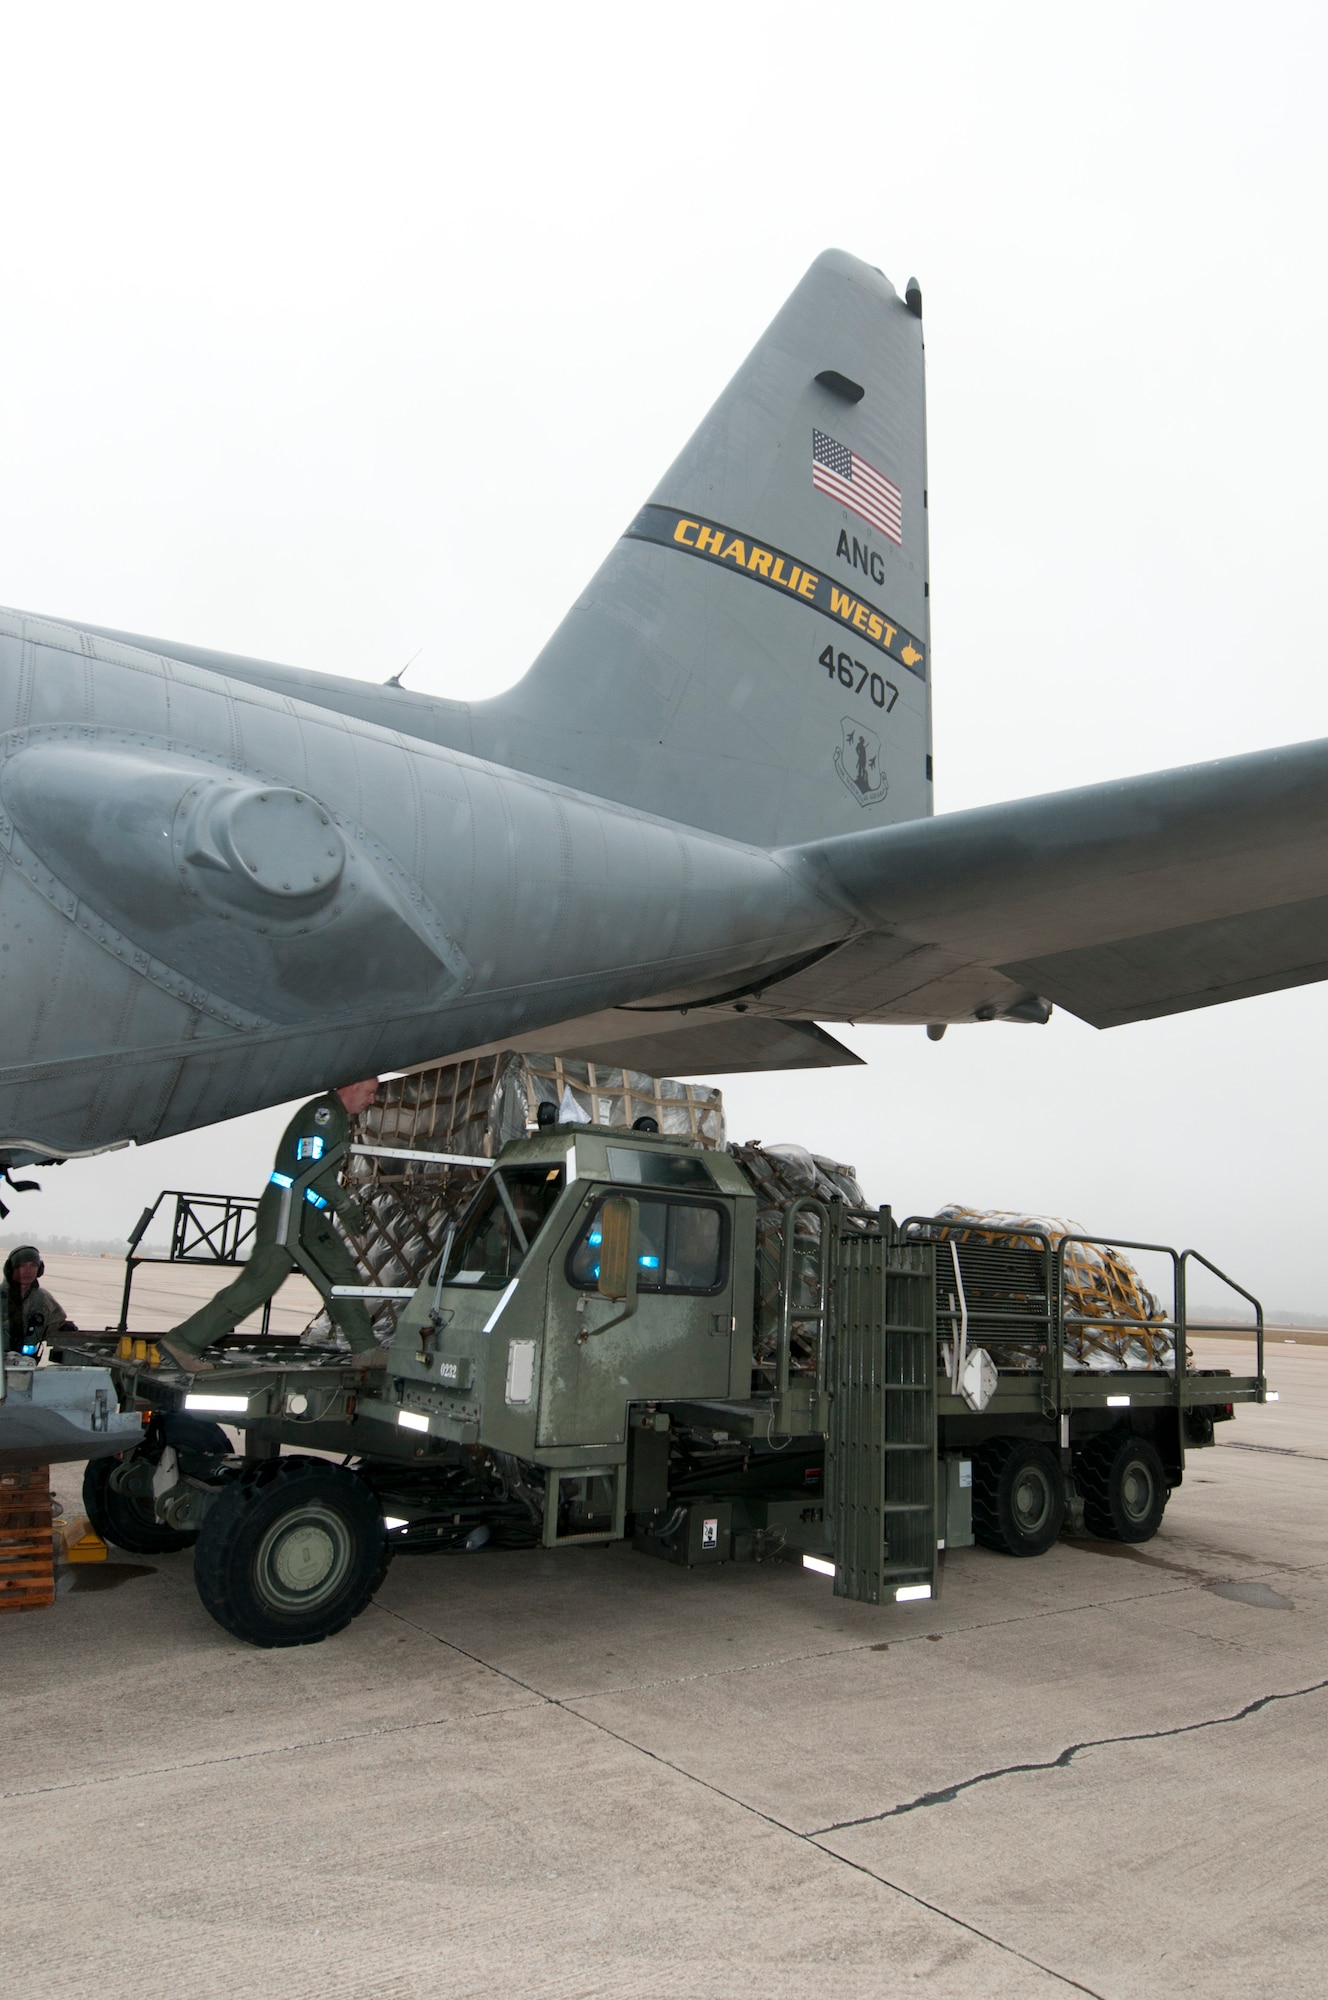 Staff Sgt. Steven Soblet of the 130th Airlift Wing Air National Guard, off-loads pallets from a C-130 Hercules, during Operational Readiness Exercise at the Mississippi Air National Guard's Combat Readiness Training Center Gulfport in Gulfport, Miss. The 134th AEW is comprised of four Units; the 153rd Airlift Wing, the 130th Airlift Wing, the 375th Air Mobility Wing and the 11th Wing. The exercise assesses the abilities of the individual units to deploy forces, quickly respond and recover assets during a weeklong exercise conducted and graded by an Exercise Evaluation Team. (U.S. Air Force Photo by Tech. Sgt. Bryan G. Stevens/Released)